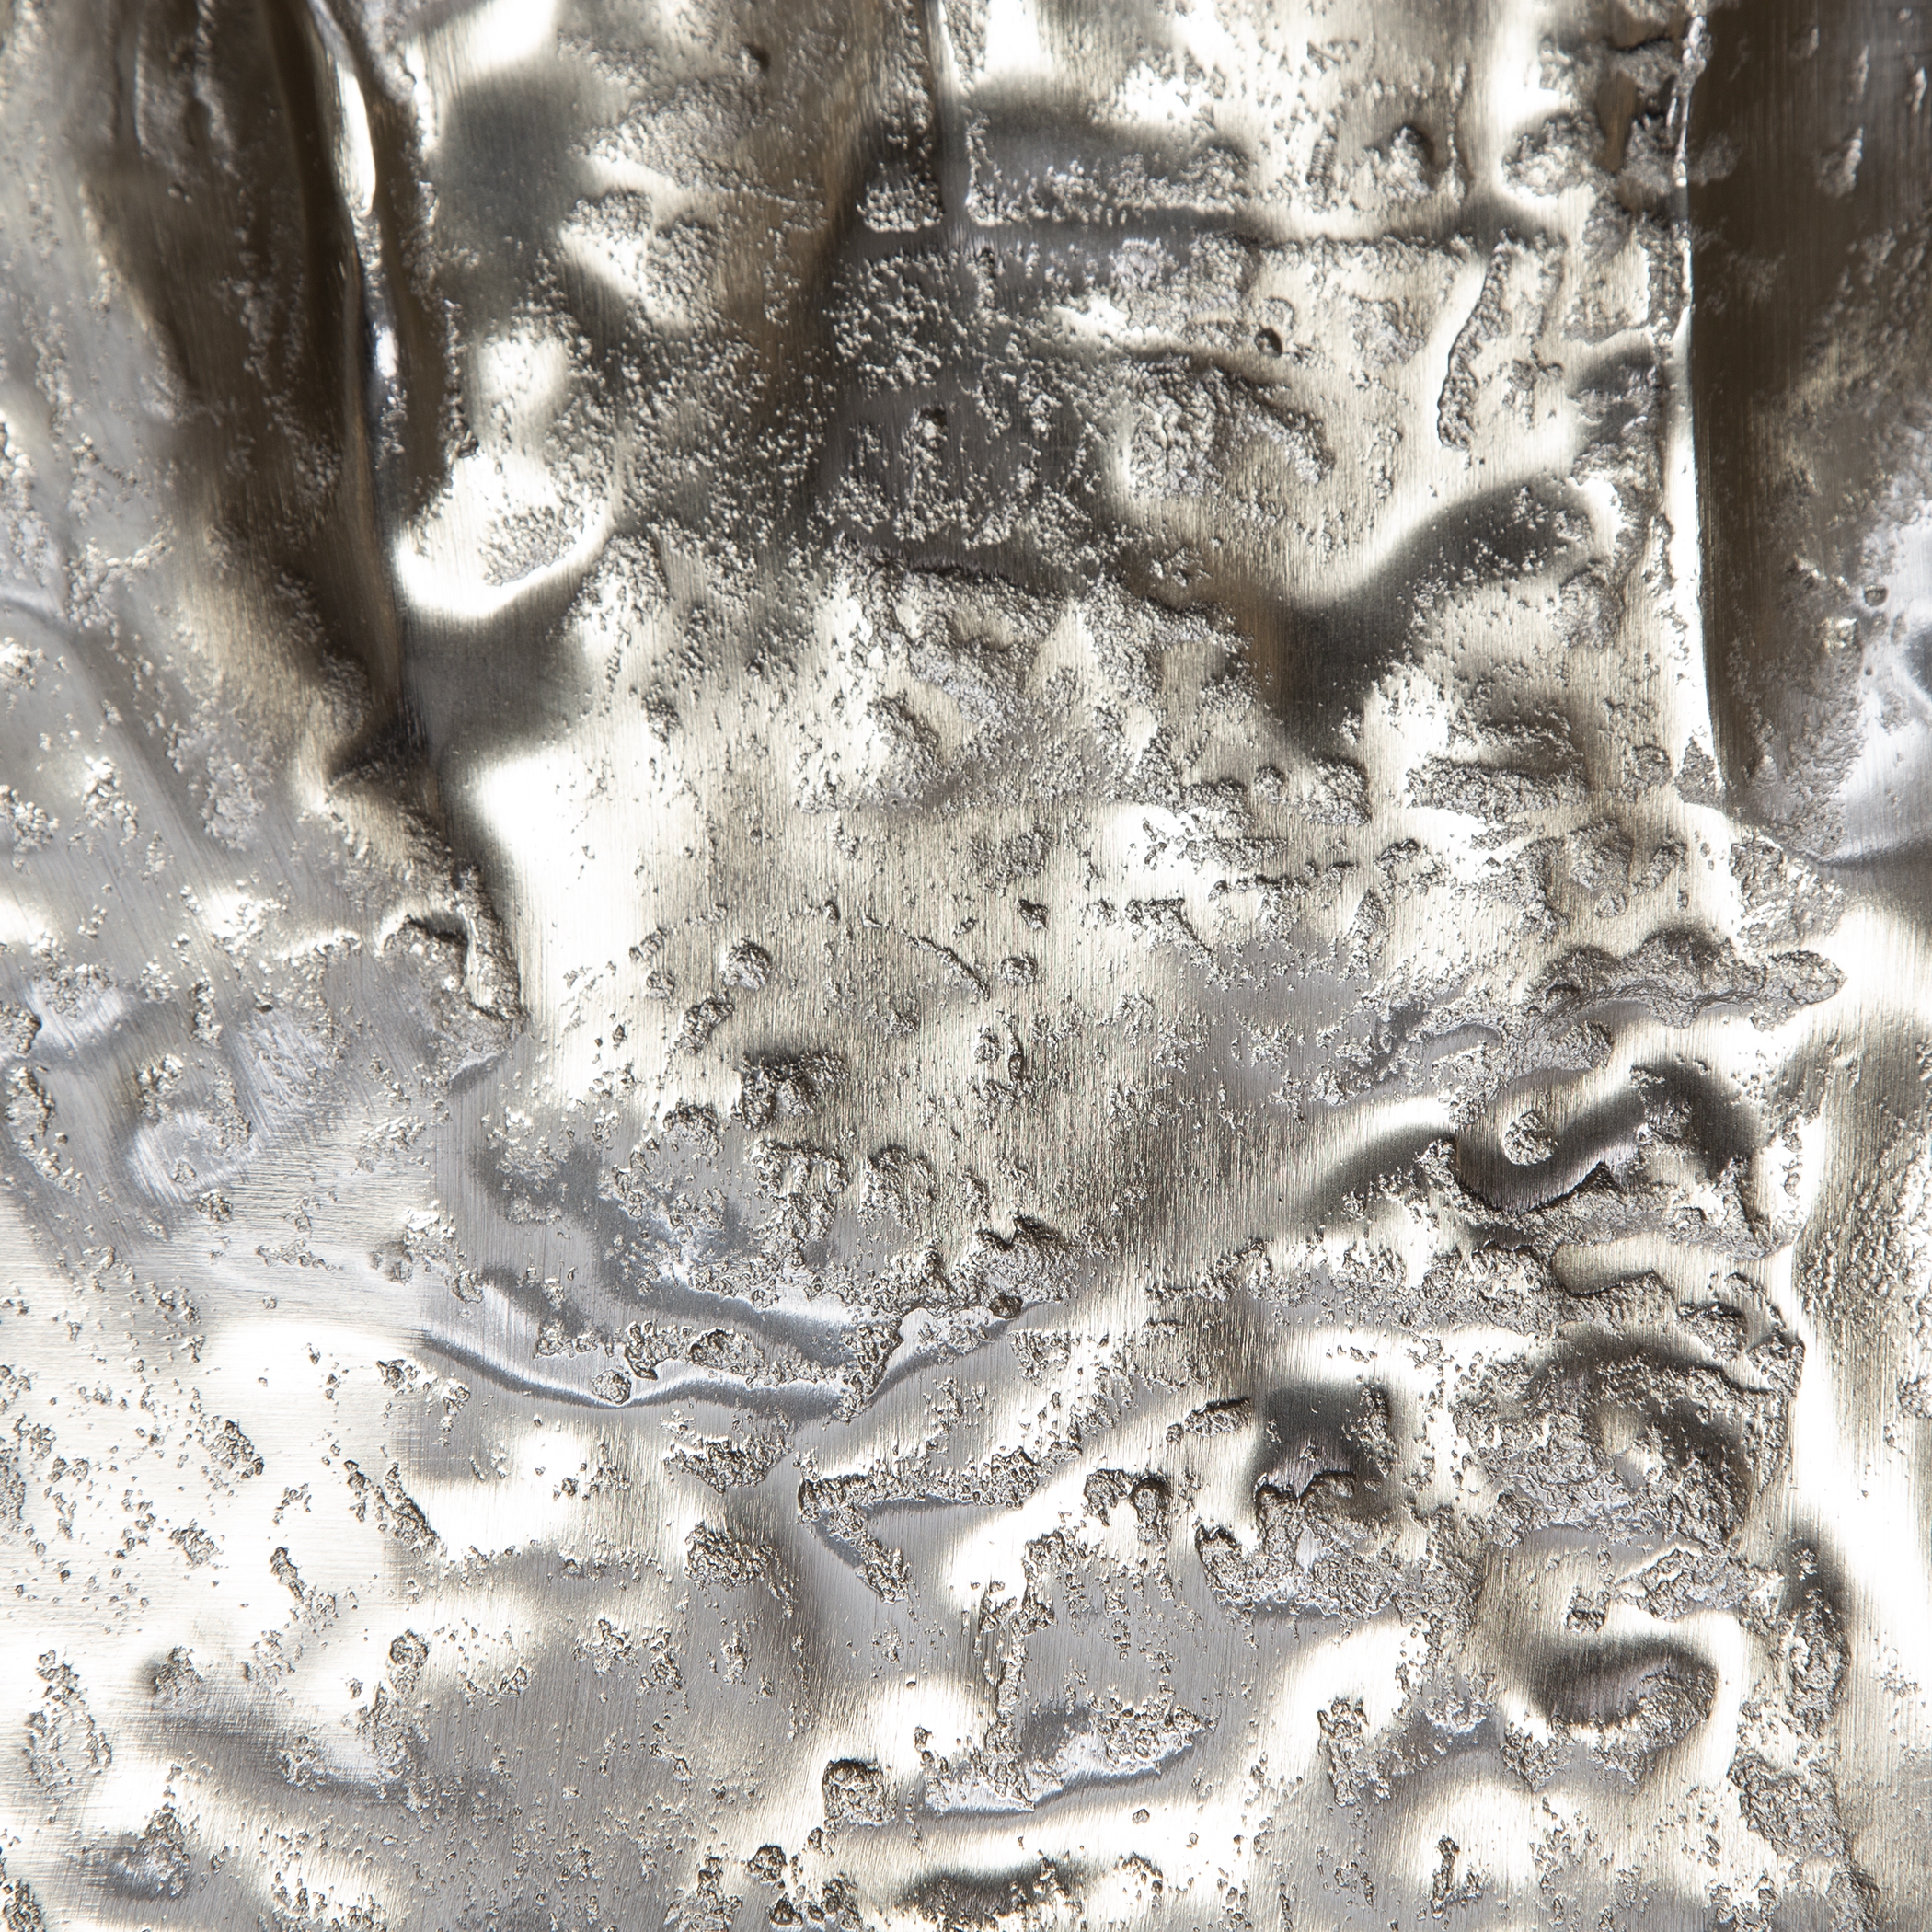 Archive Nickel Wall Decor - Image 5